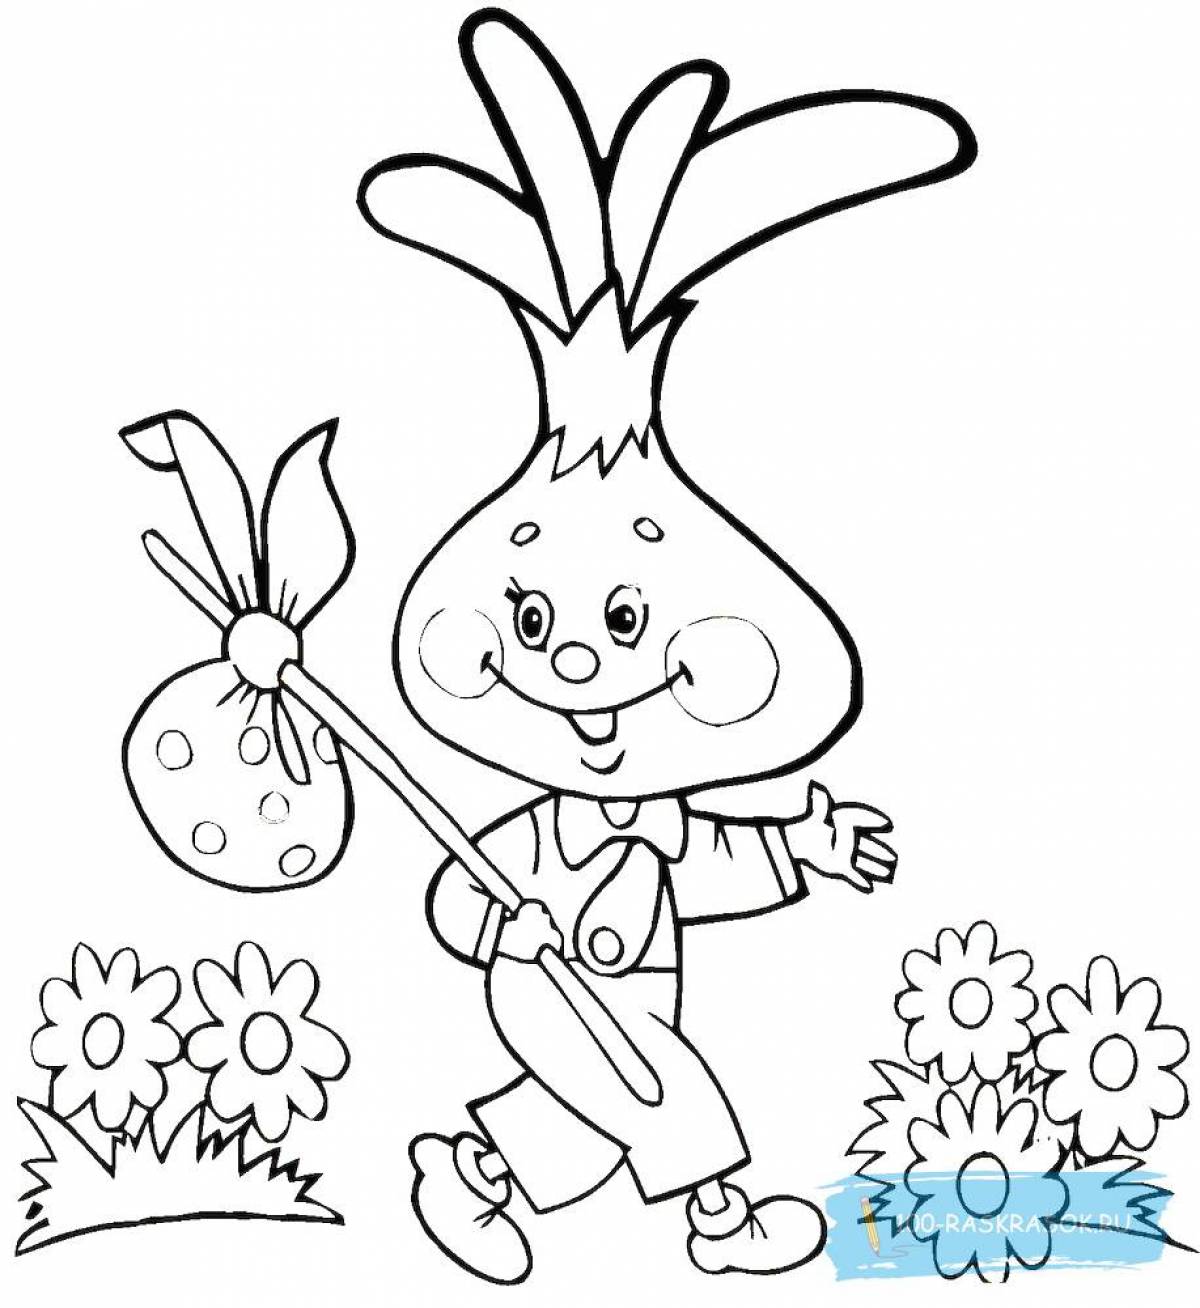 Cute fairy tale characters coloring pages